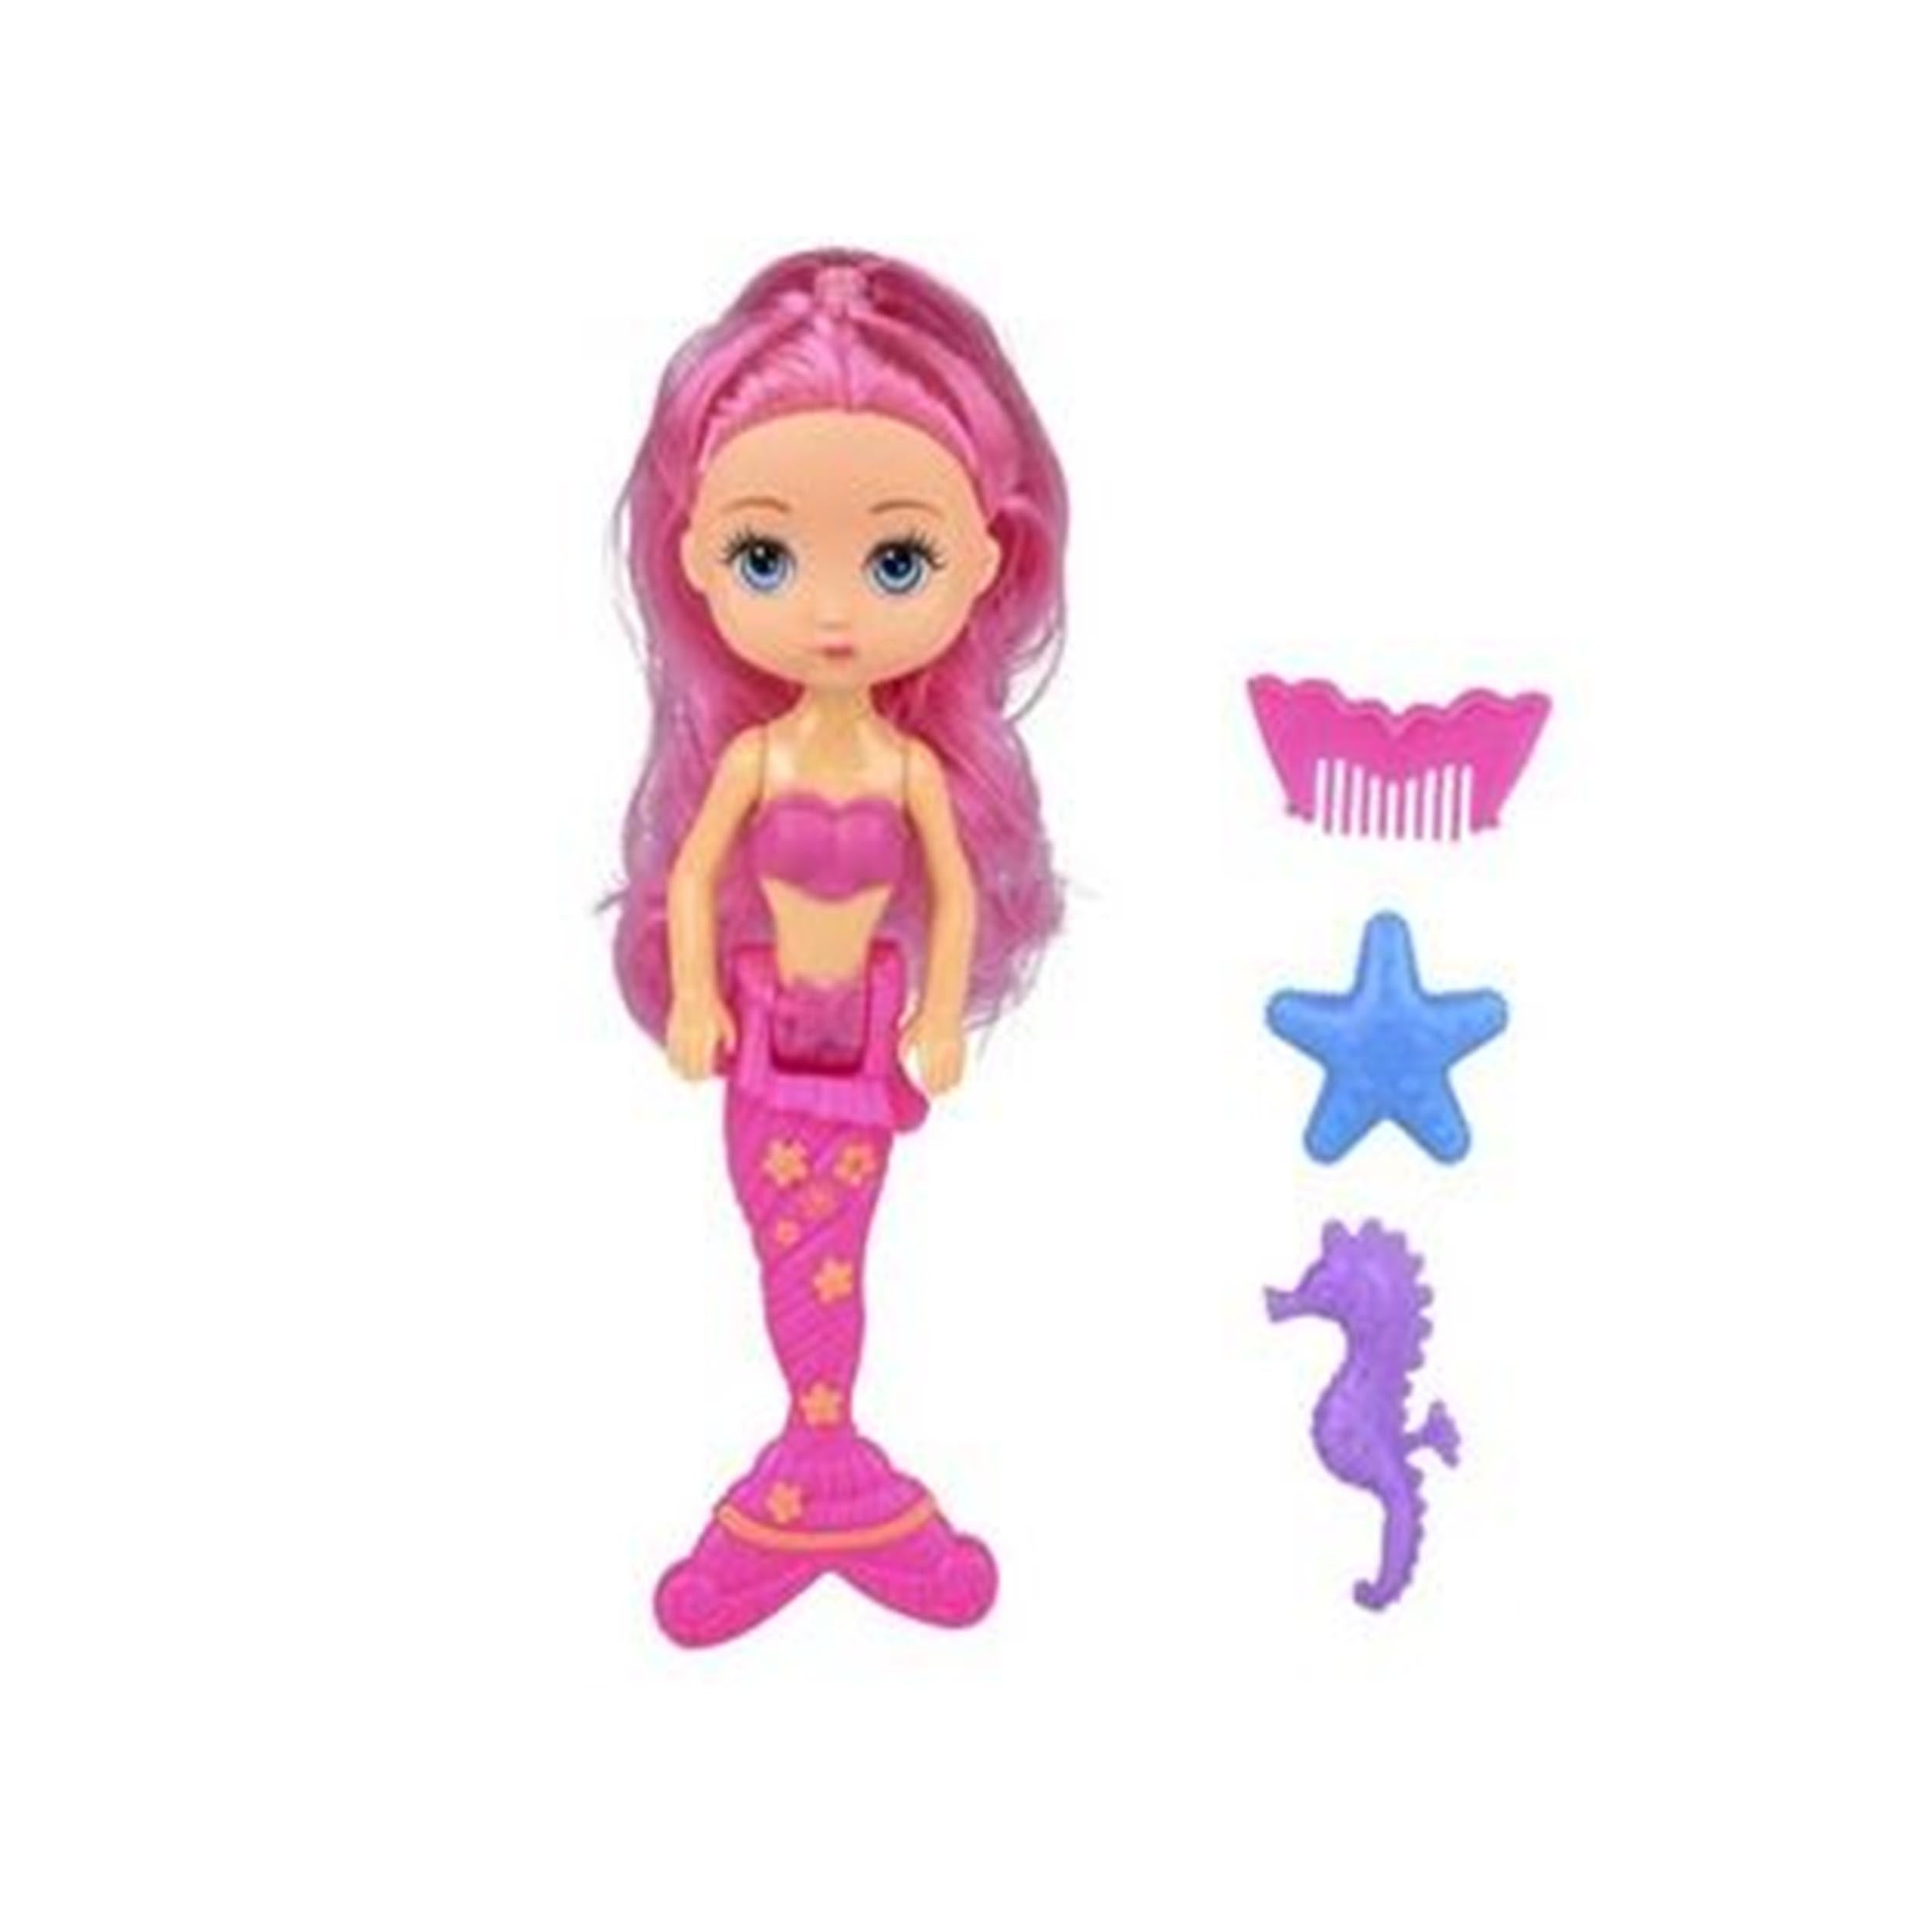 7-Inch Mermaid Doll Set - Includes Doll, Hair Brush, Starfish, and Seahorse (Assorted)